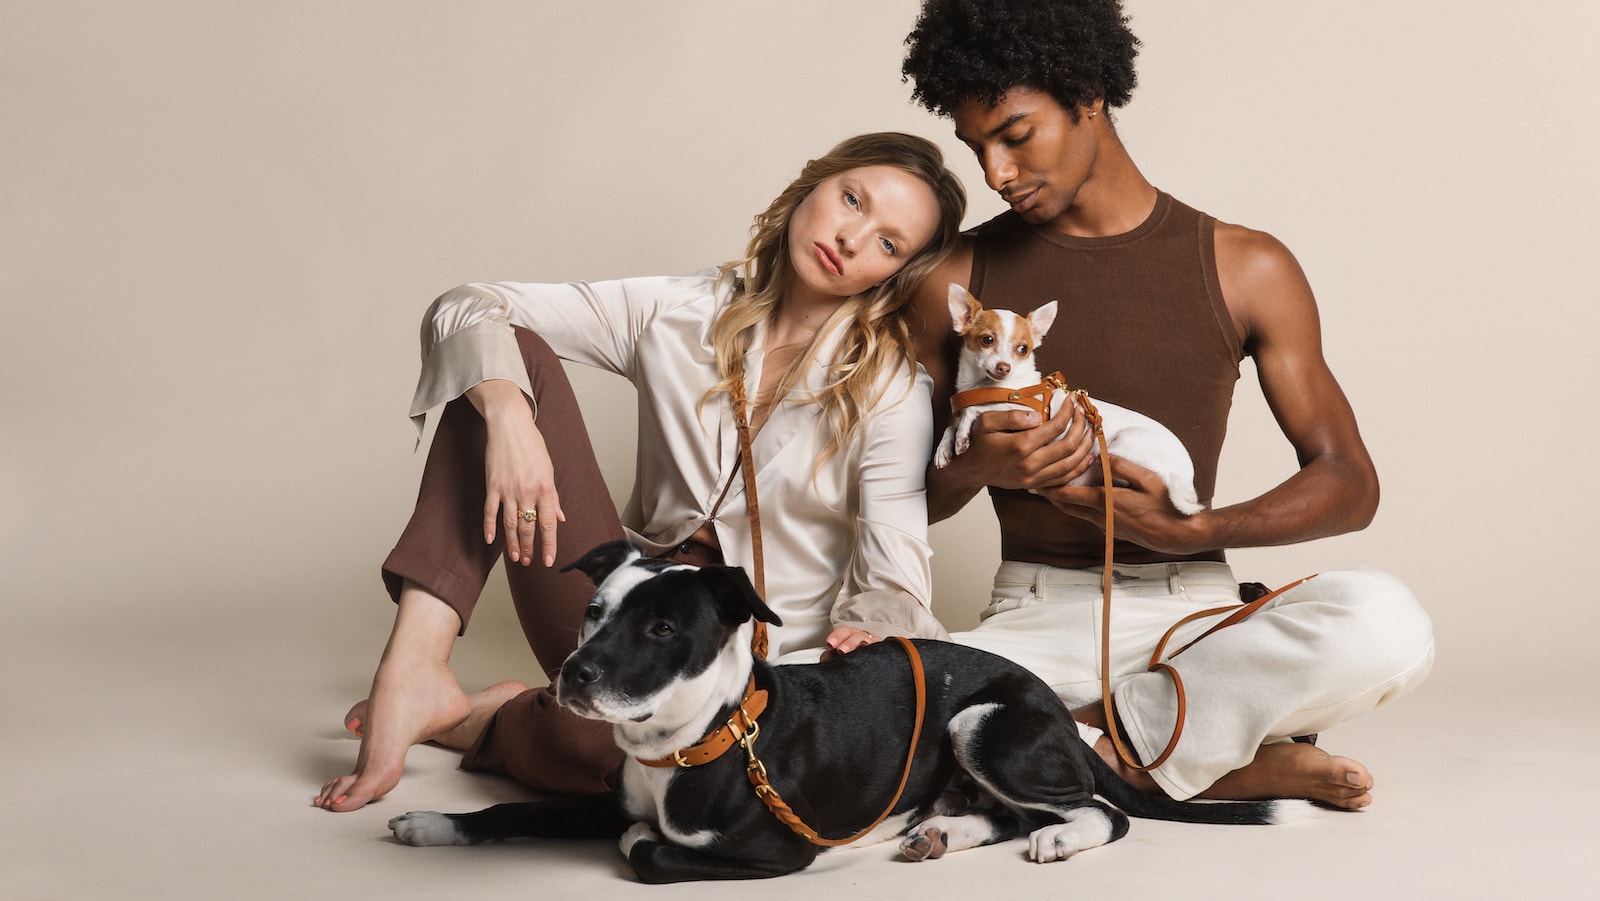 Molly & Stitch fashionable dog accessories brings handcrafted, haute fashion to your pup – Gadget Flow